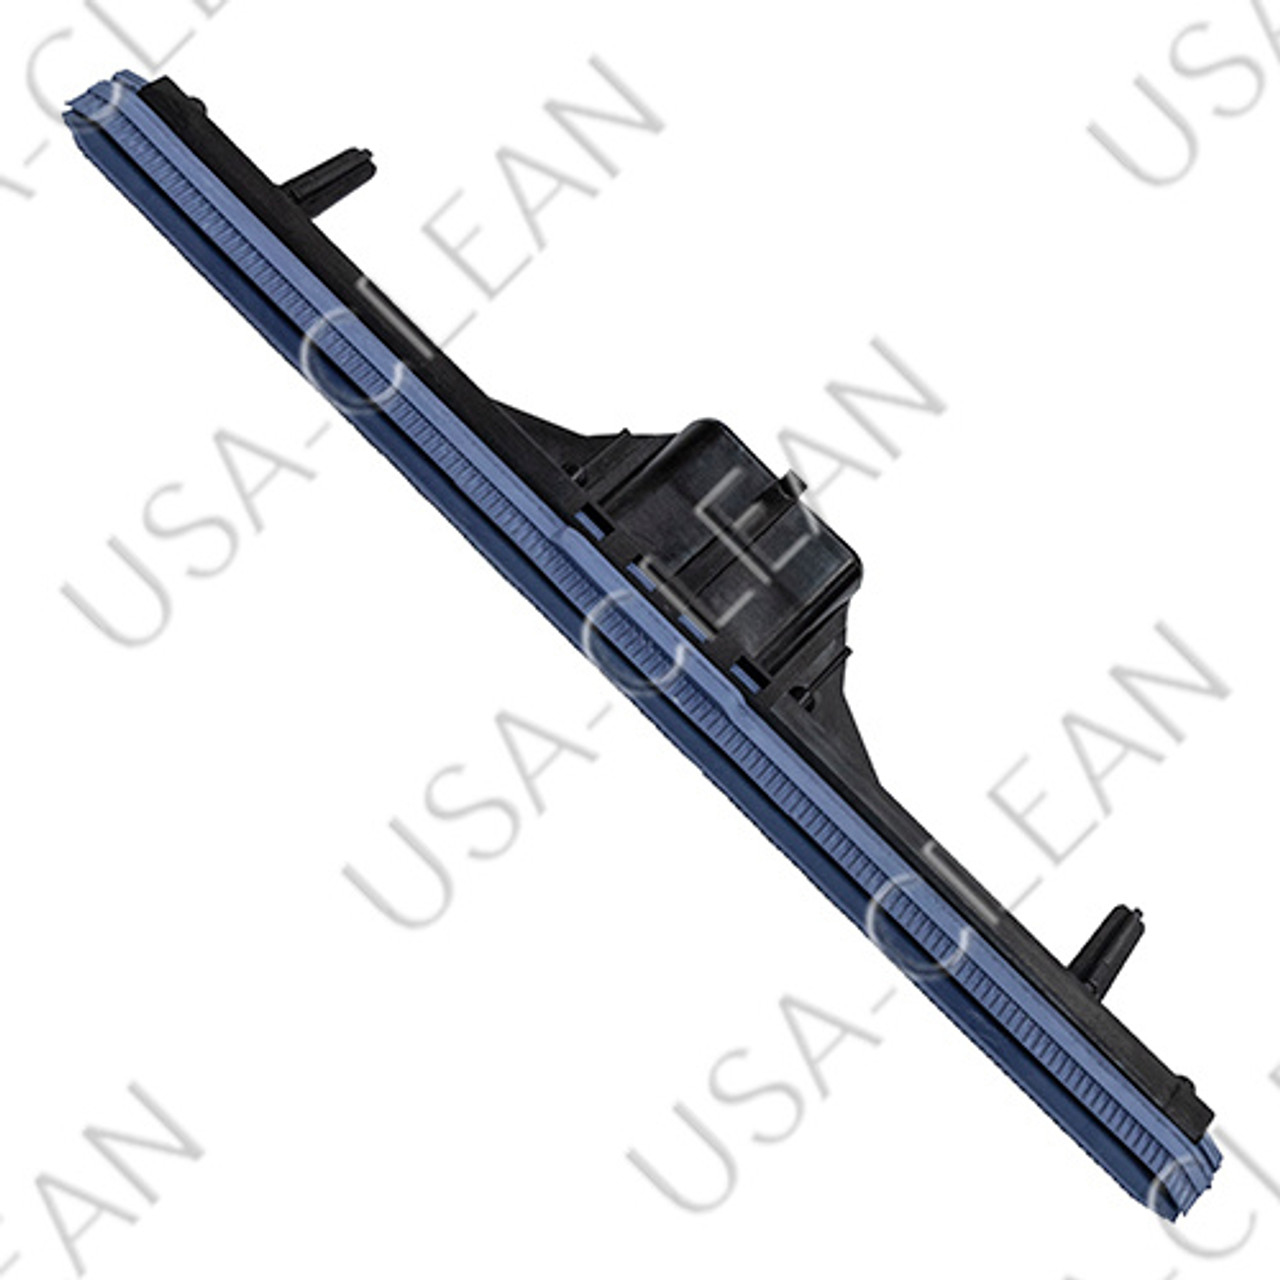 Stainless Steel 4-Jet Floor Squeegee Wand - Alliance USA Distributors &  Services